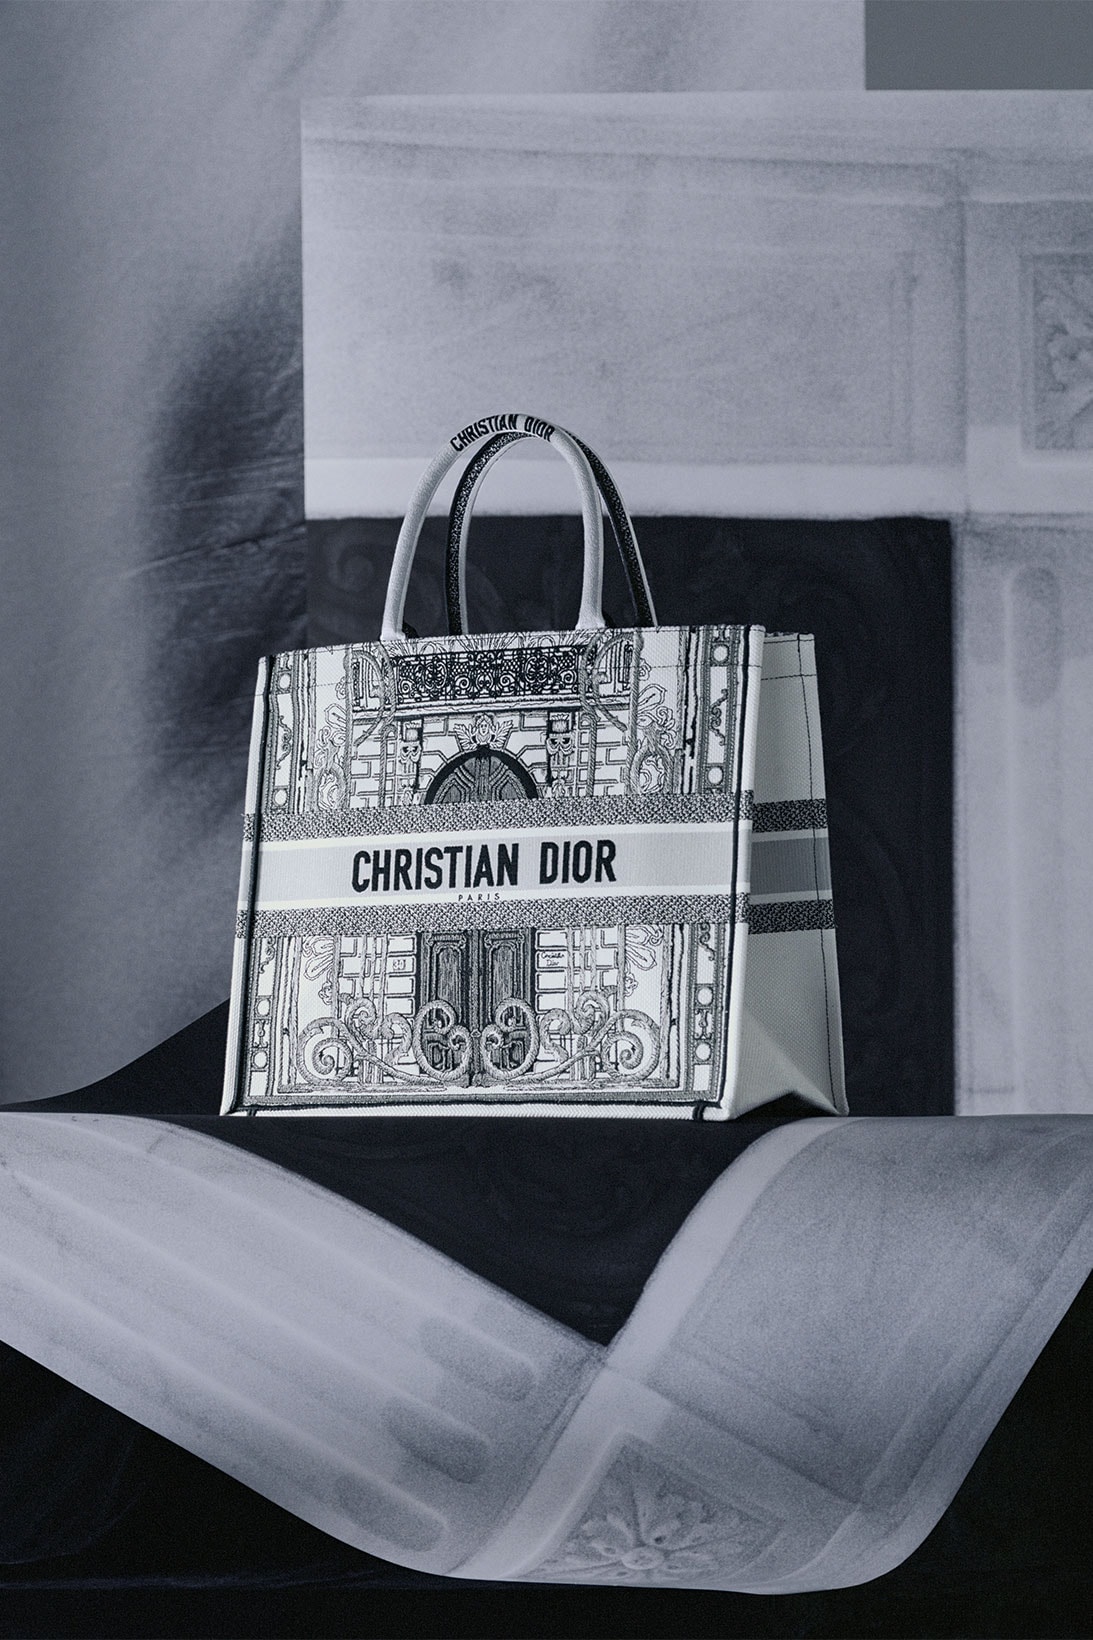 30 Montaigne, the Latest Dior Obsession - Academy by